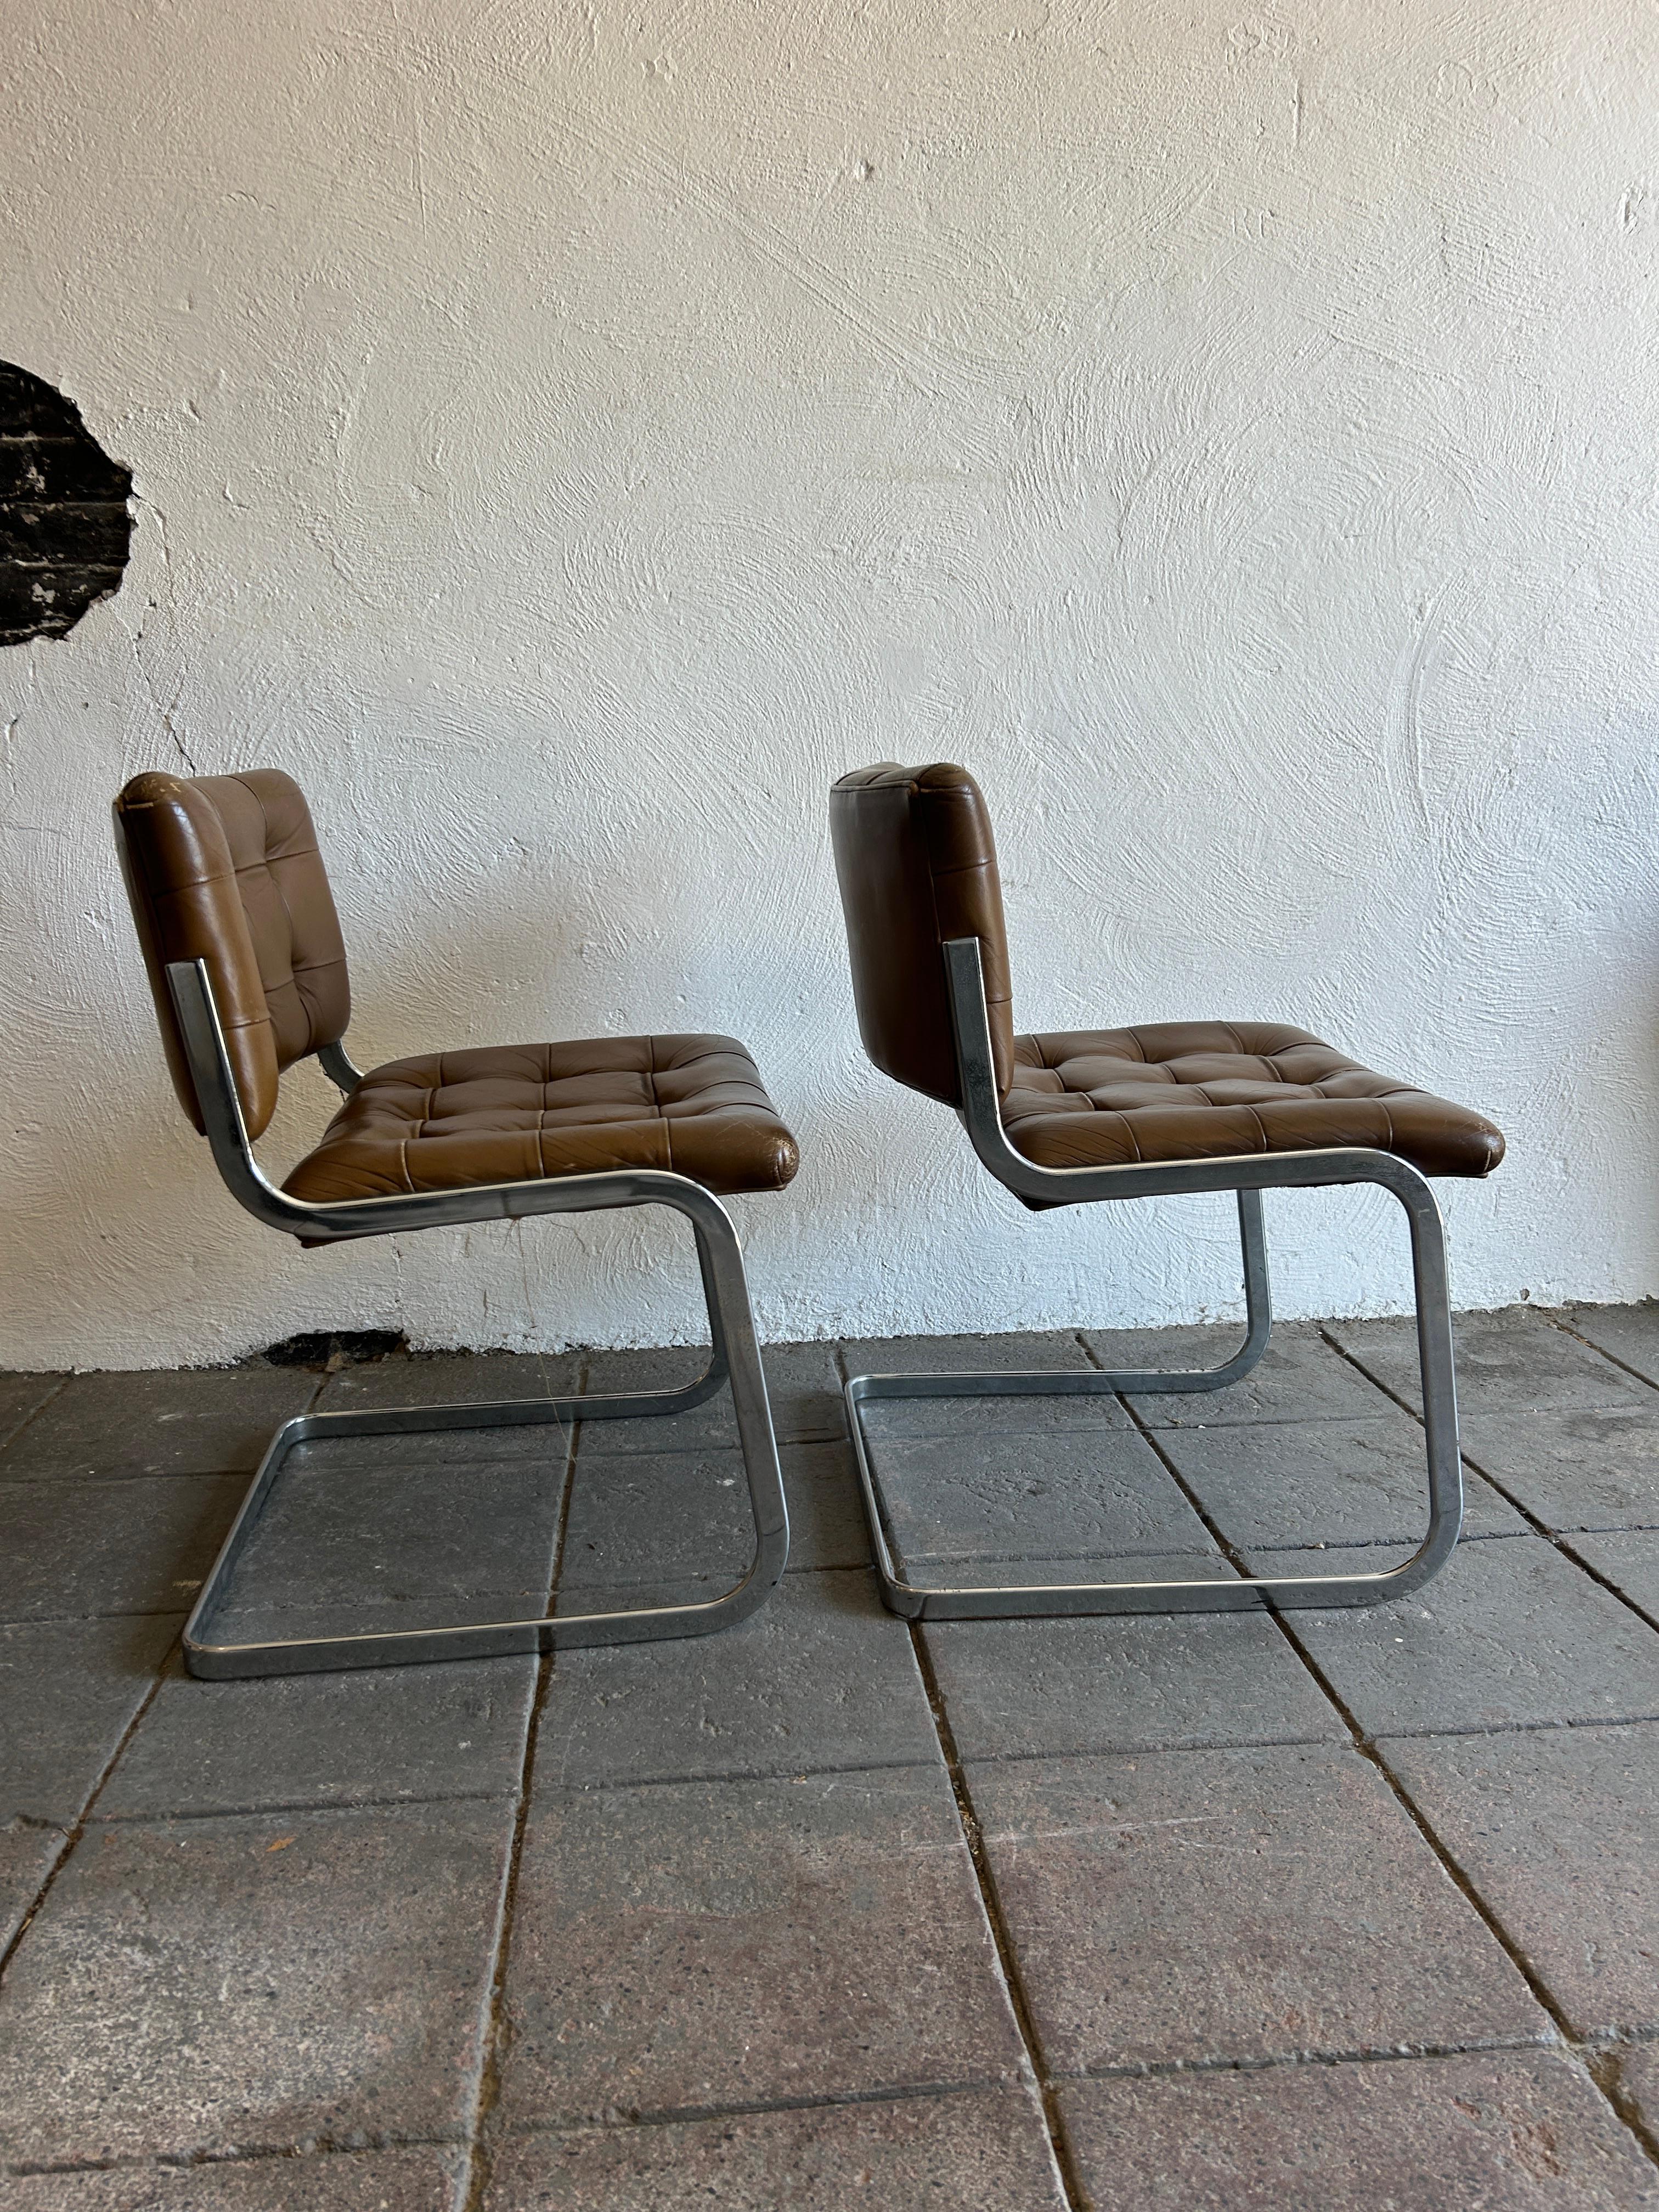 A unique pair of RH-304 Leather chairs. designed by Robert Haussmann and manufactured by Stendig De Sede. This pair was made circa 1960. these chairs are upholstered in brown leather. The rounded flat bar tube frames are made of chrome-plated steel.